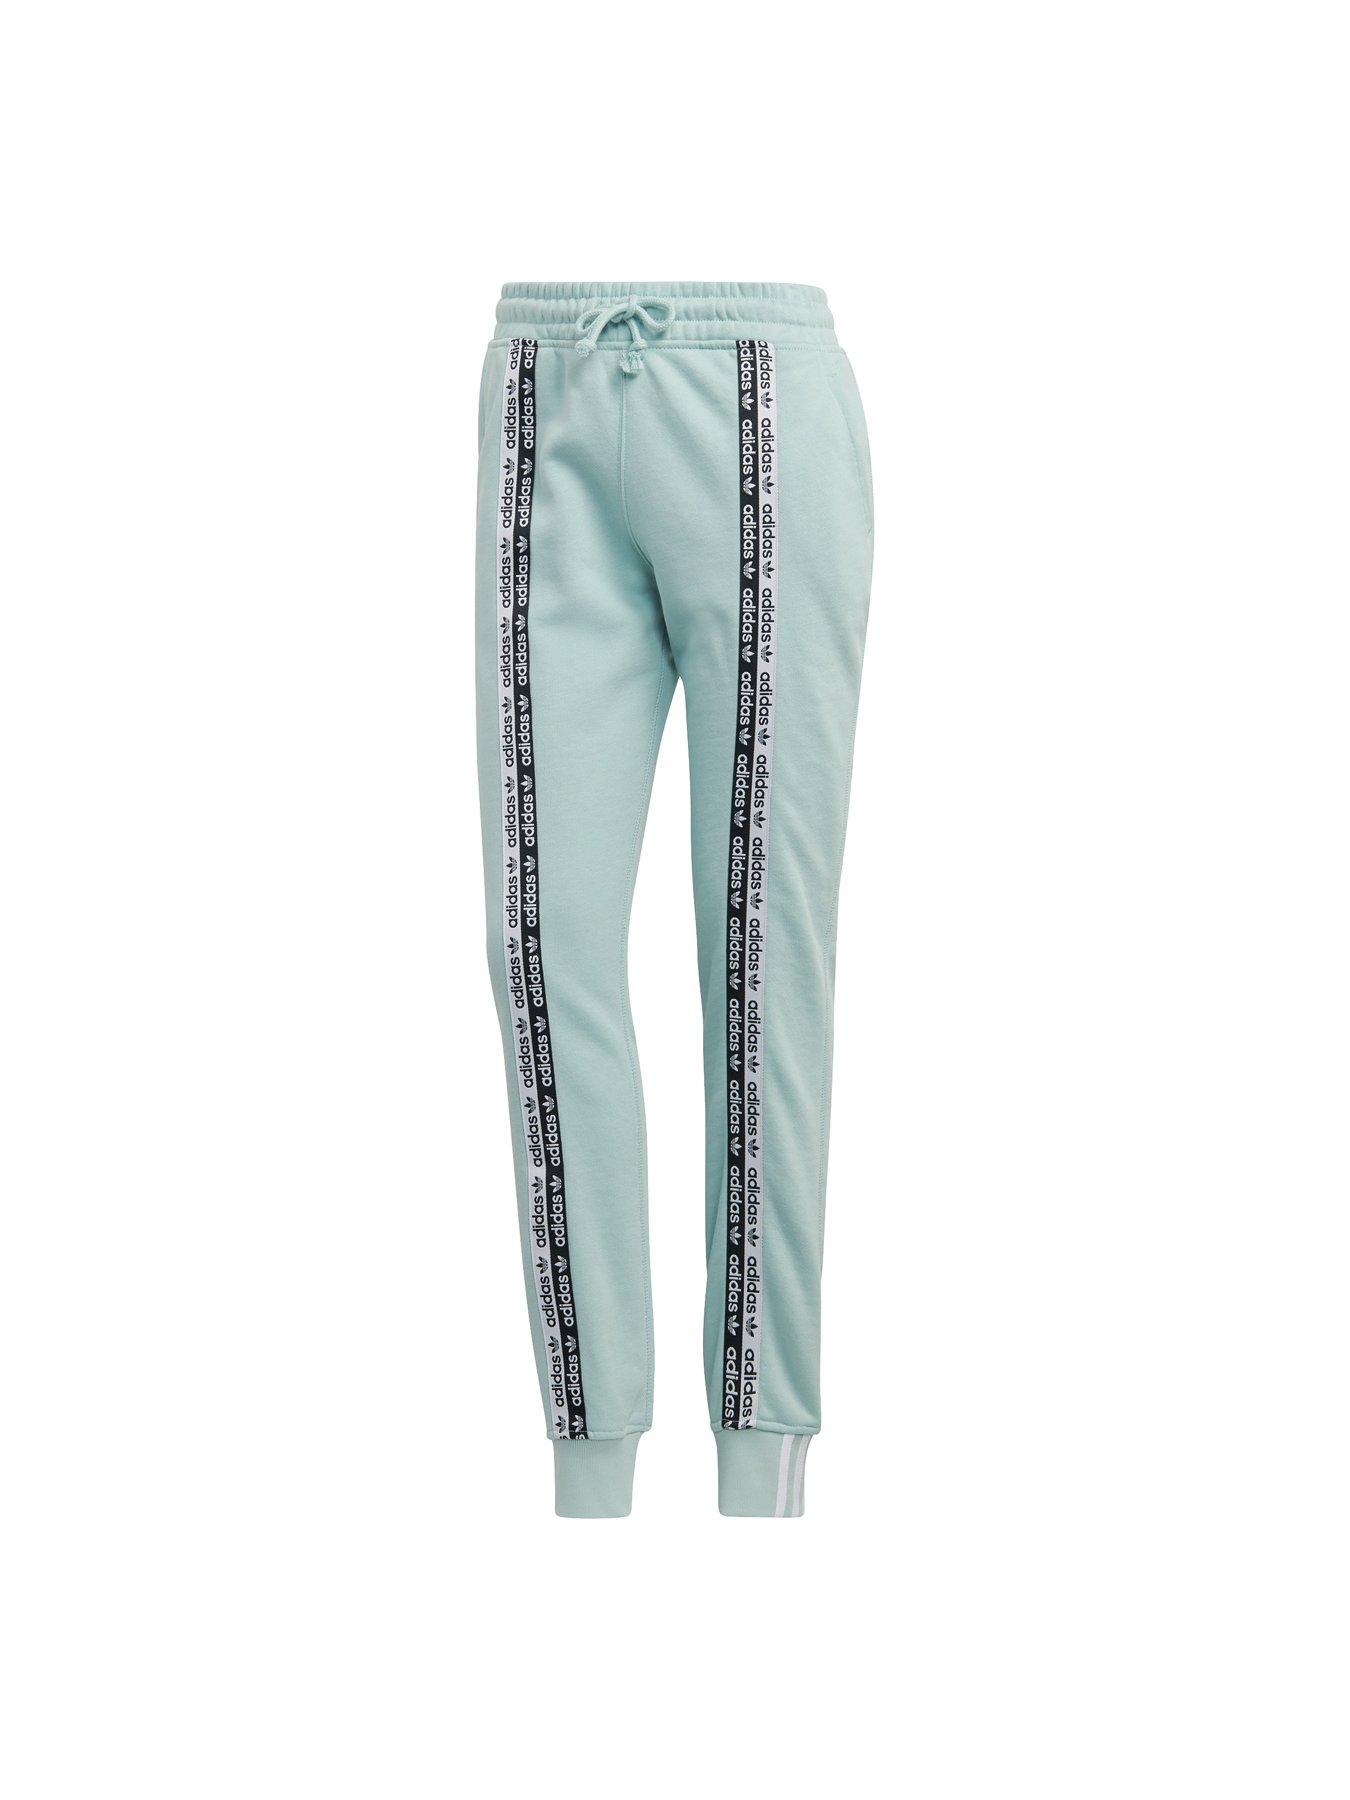 adidas originals new york quilted reg fit cuffed pants women's